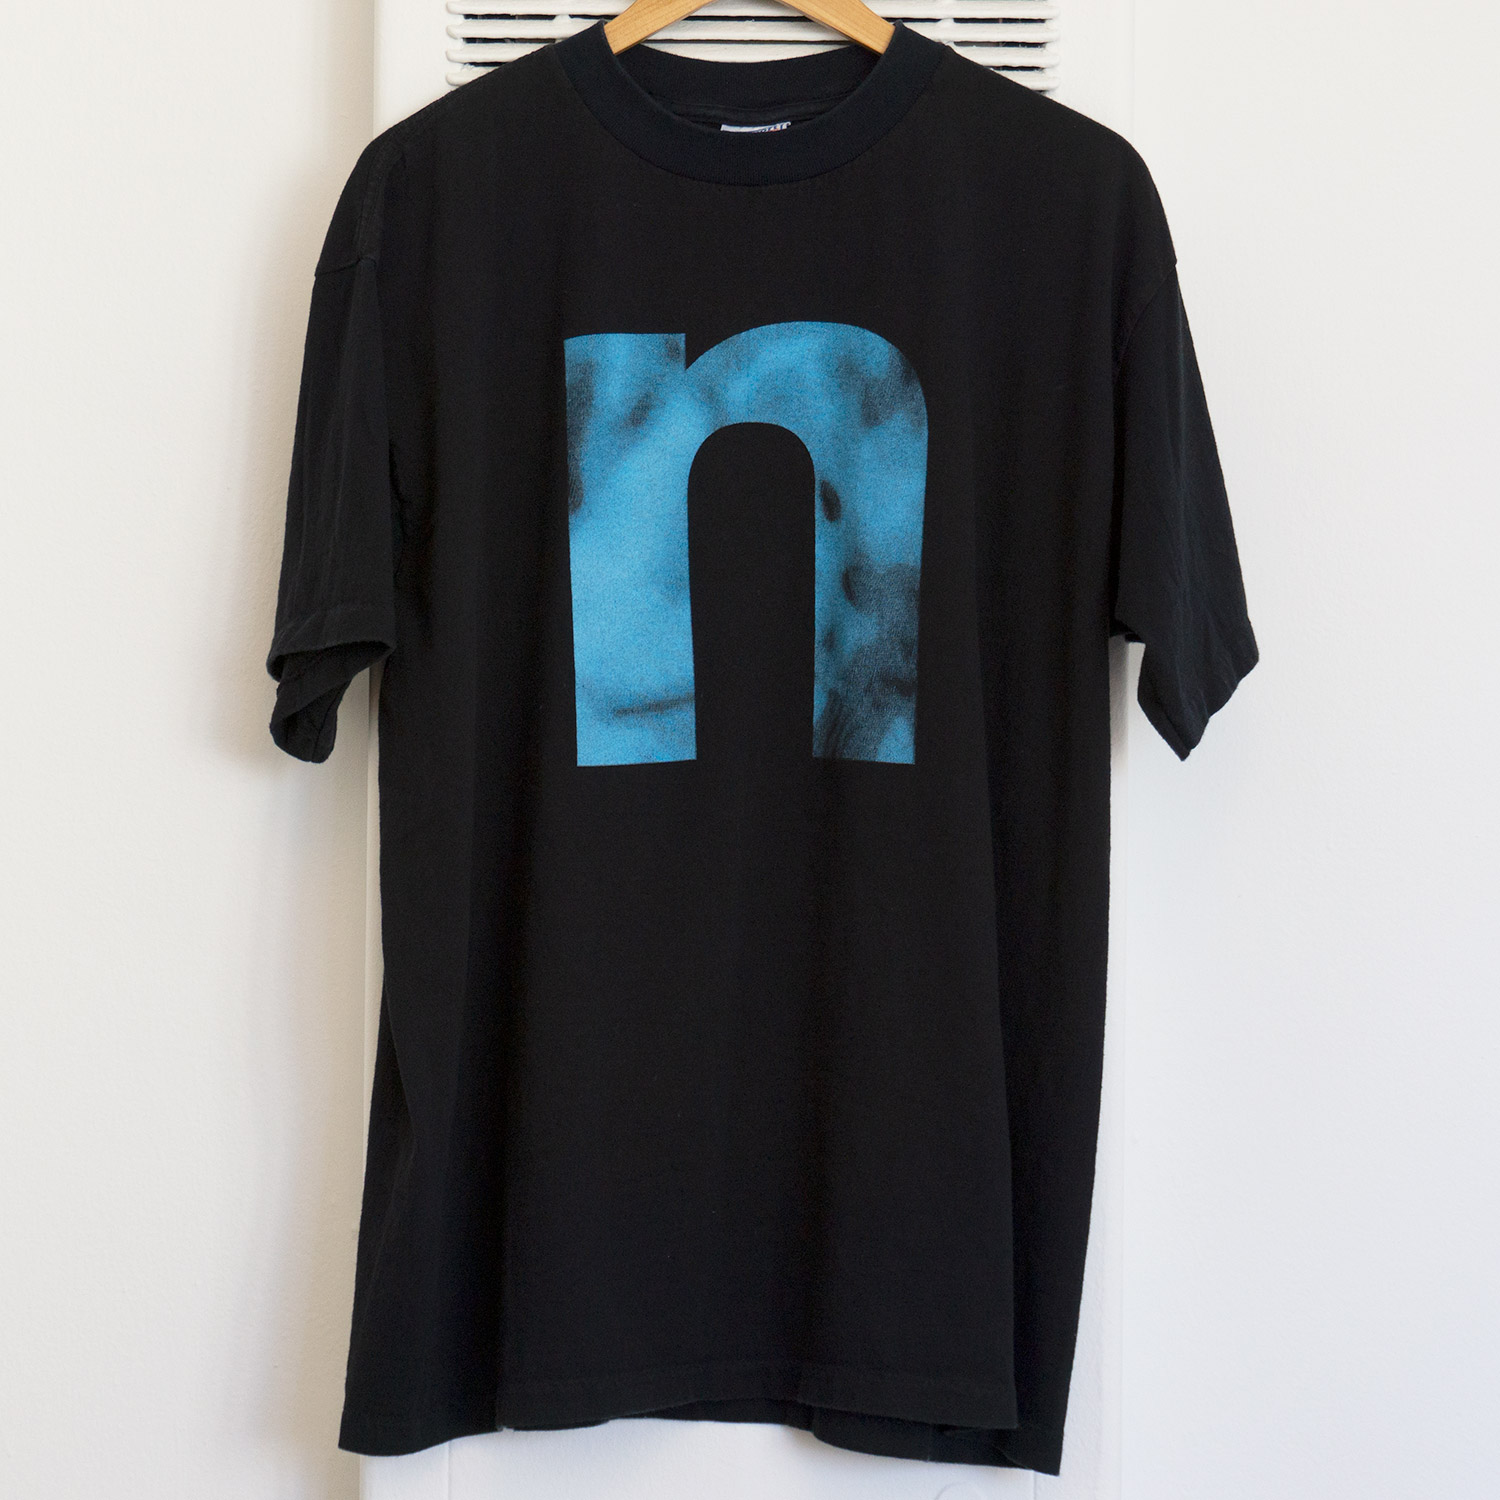 Vintage Nine Inch Nails Fixed EP T-shirt, Front